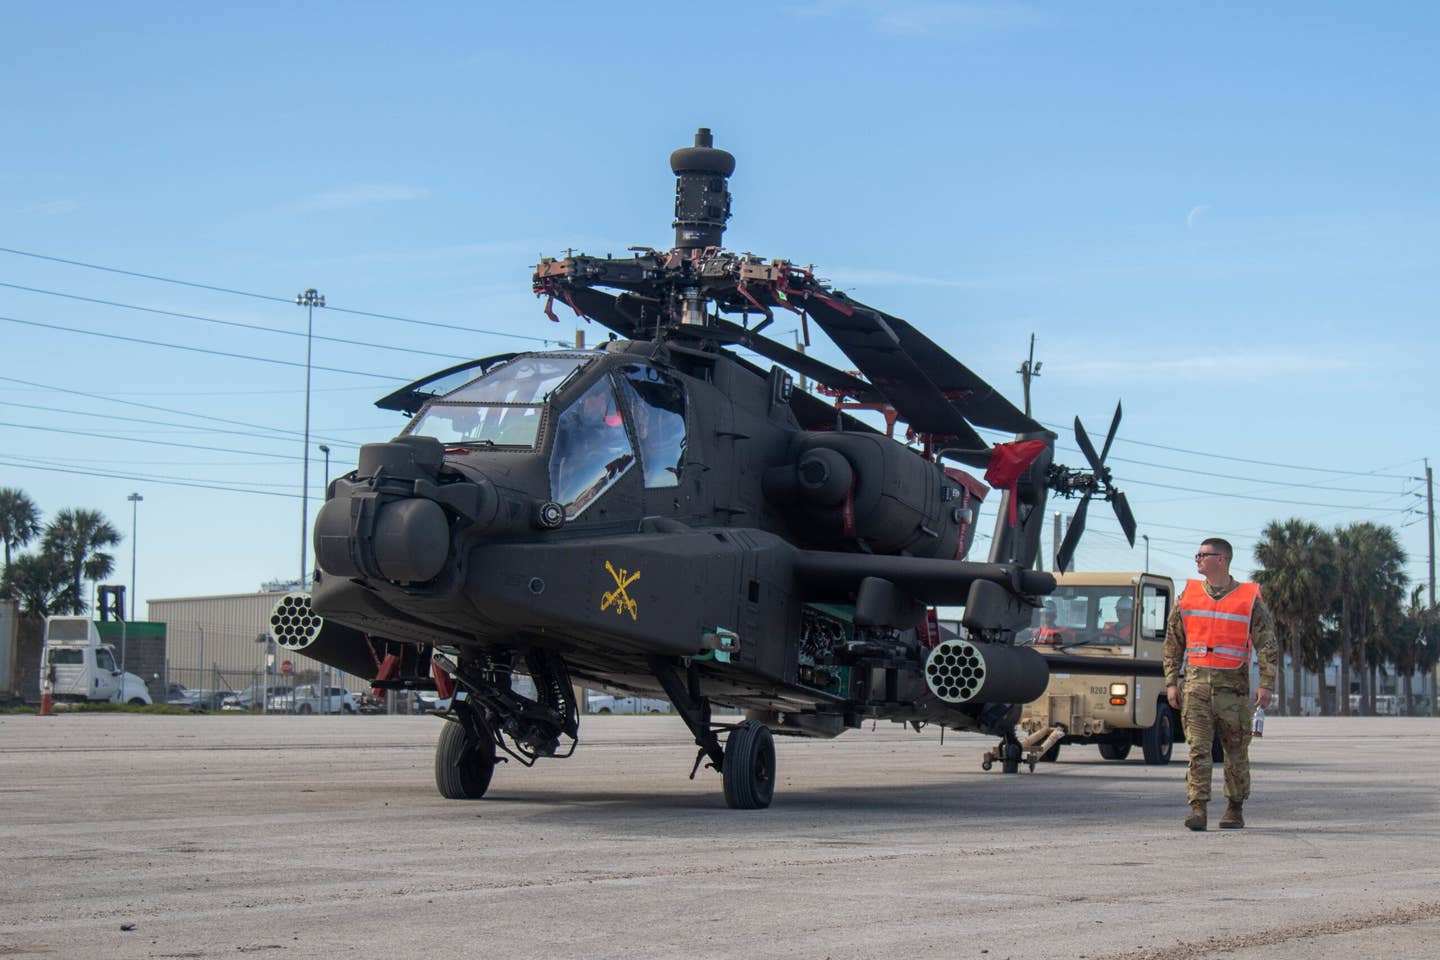 The new rotor mast communications system can be seen in this image of a 3rd Combat Aviation Brigade, 3rd Infantry Division AH-64 Apache. (U.S. Army photo by Sgt Caitlin Wilkins, 3rd Combat Aviation Brigade)